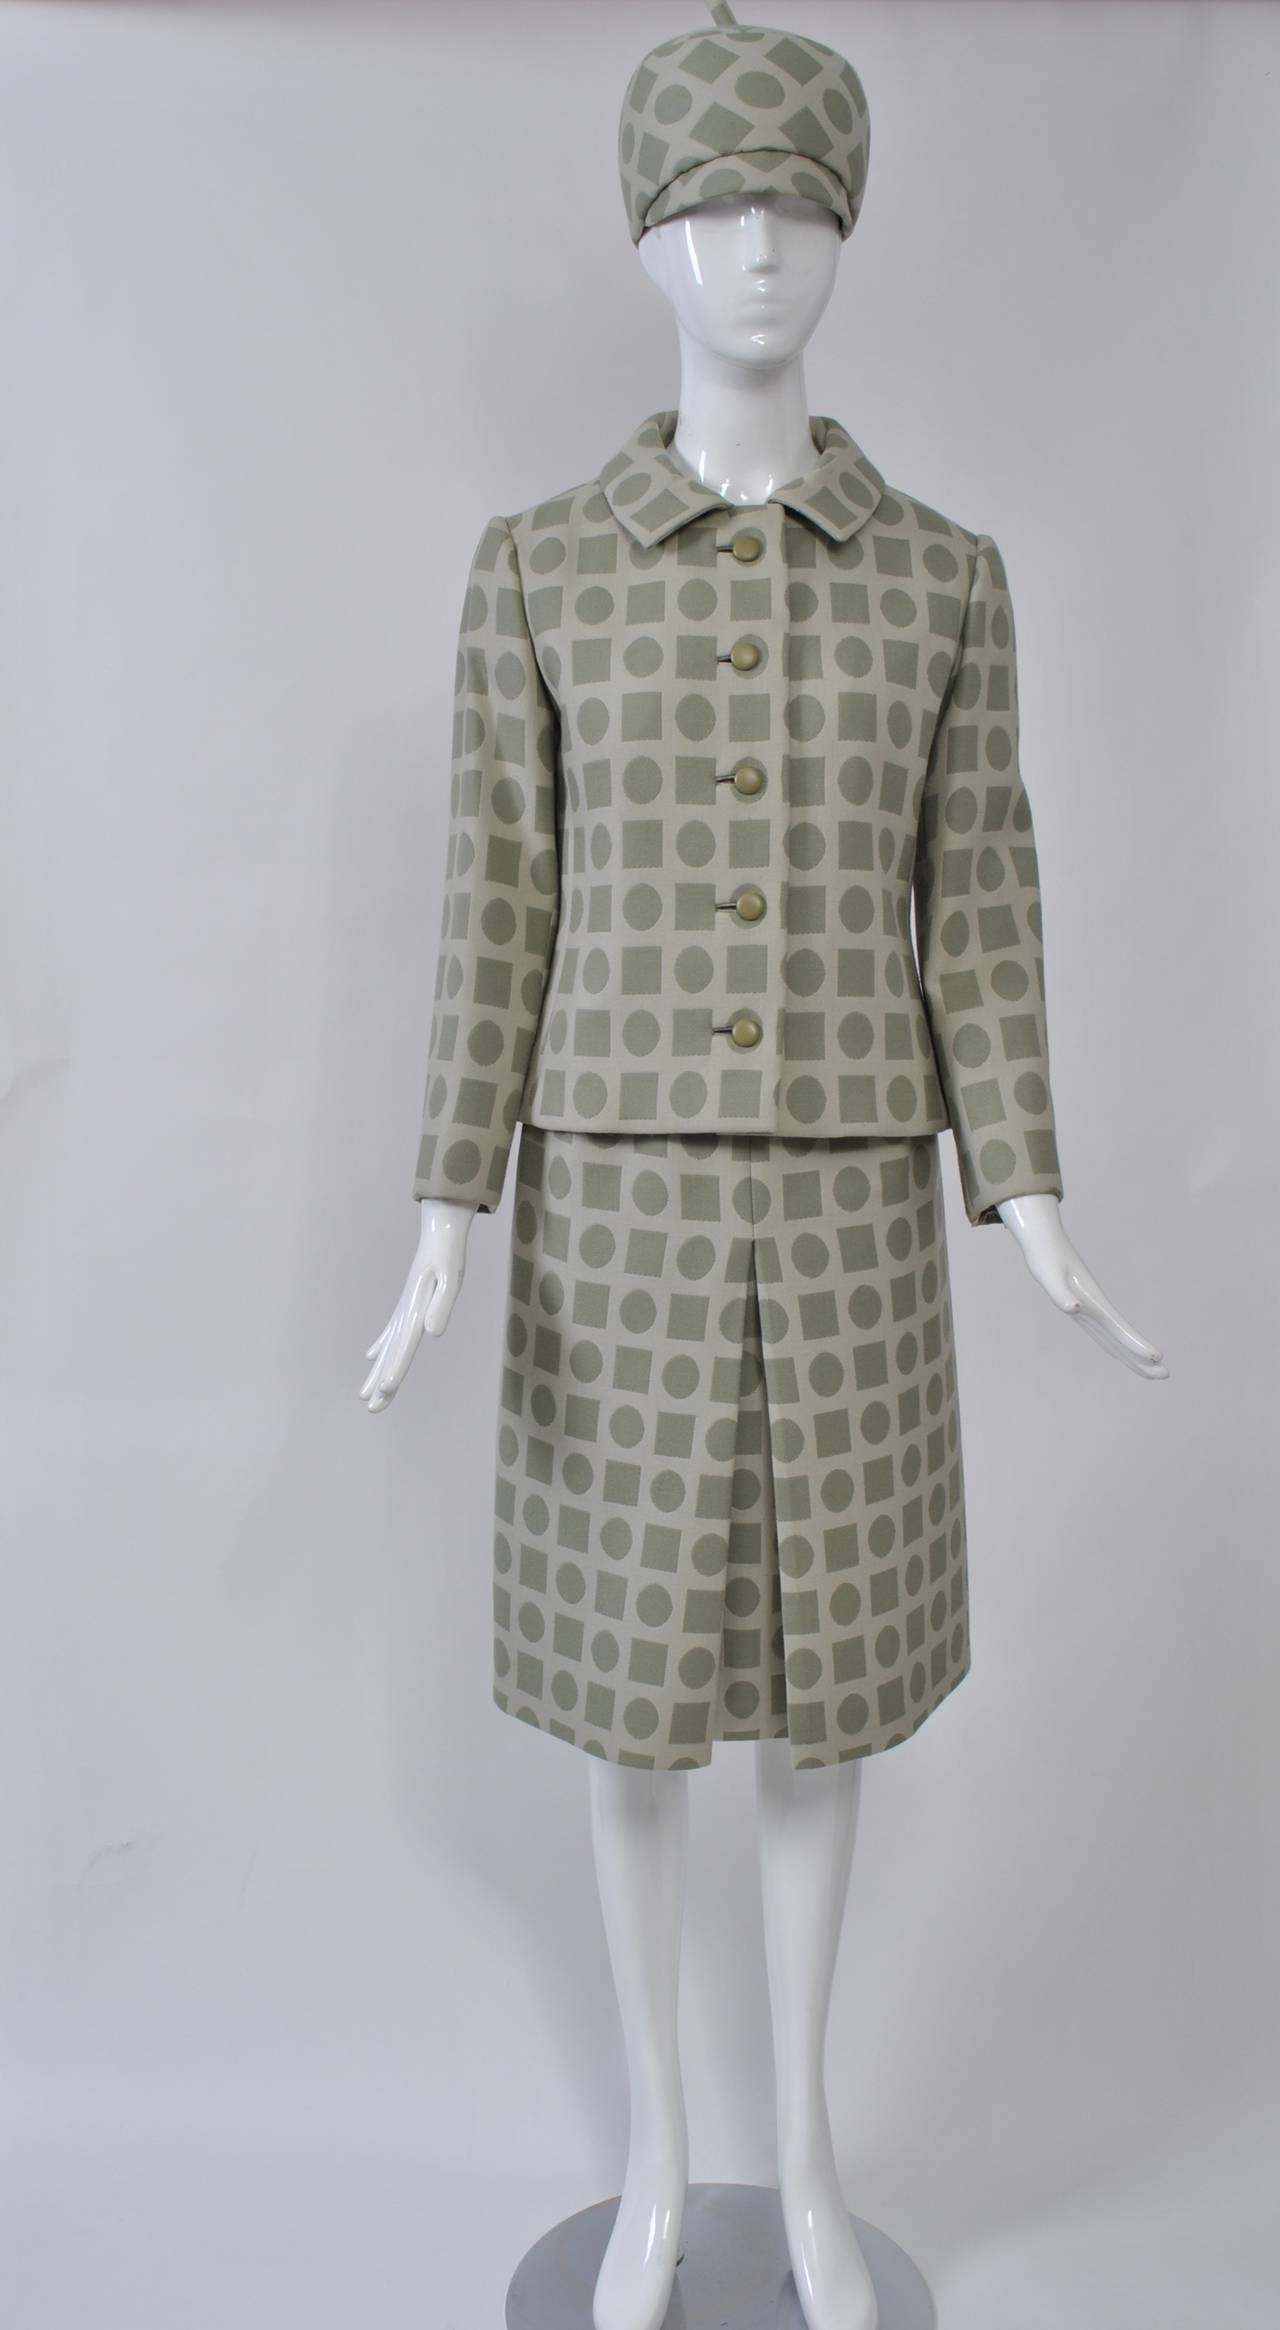 Bearing the Dior NY label, this fabulous suit and matching hat is fashioned of a jacquard wool in a subtle pale green yet bold geometric pattern of alternating circles and squares. The suit features a single-breasted, shaped hip-length jacket with a